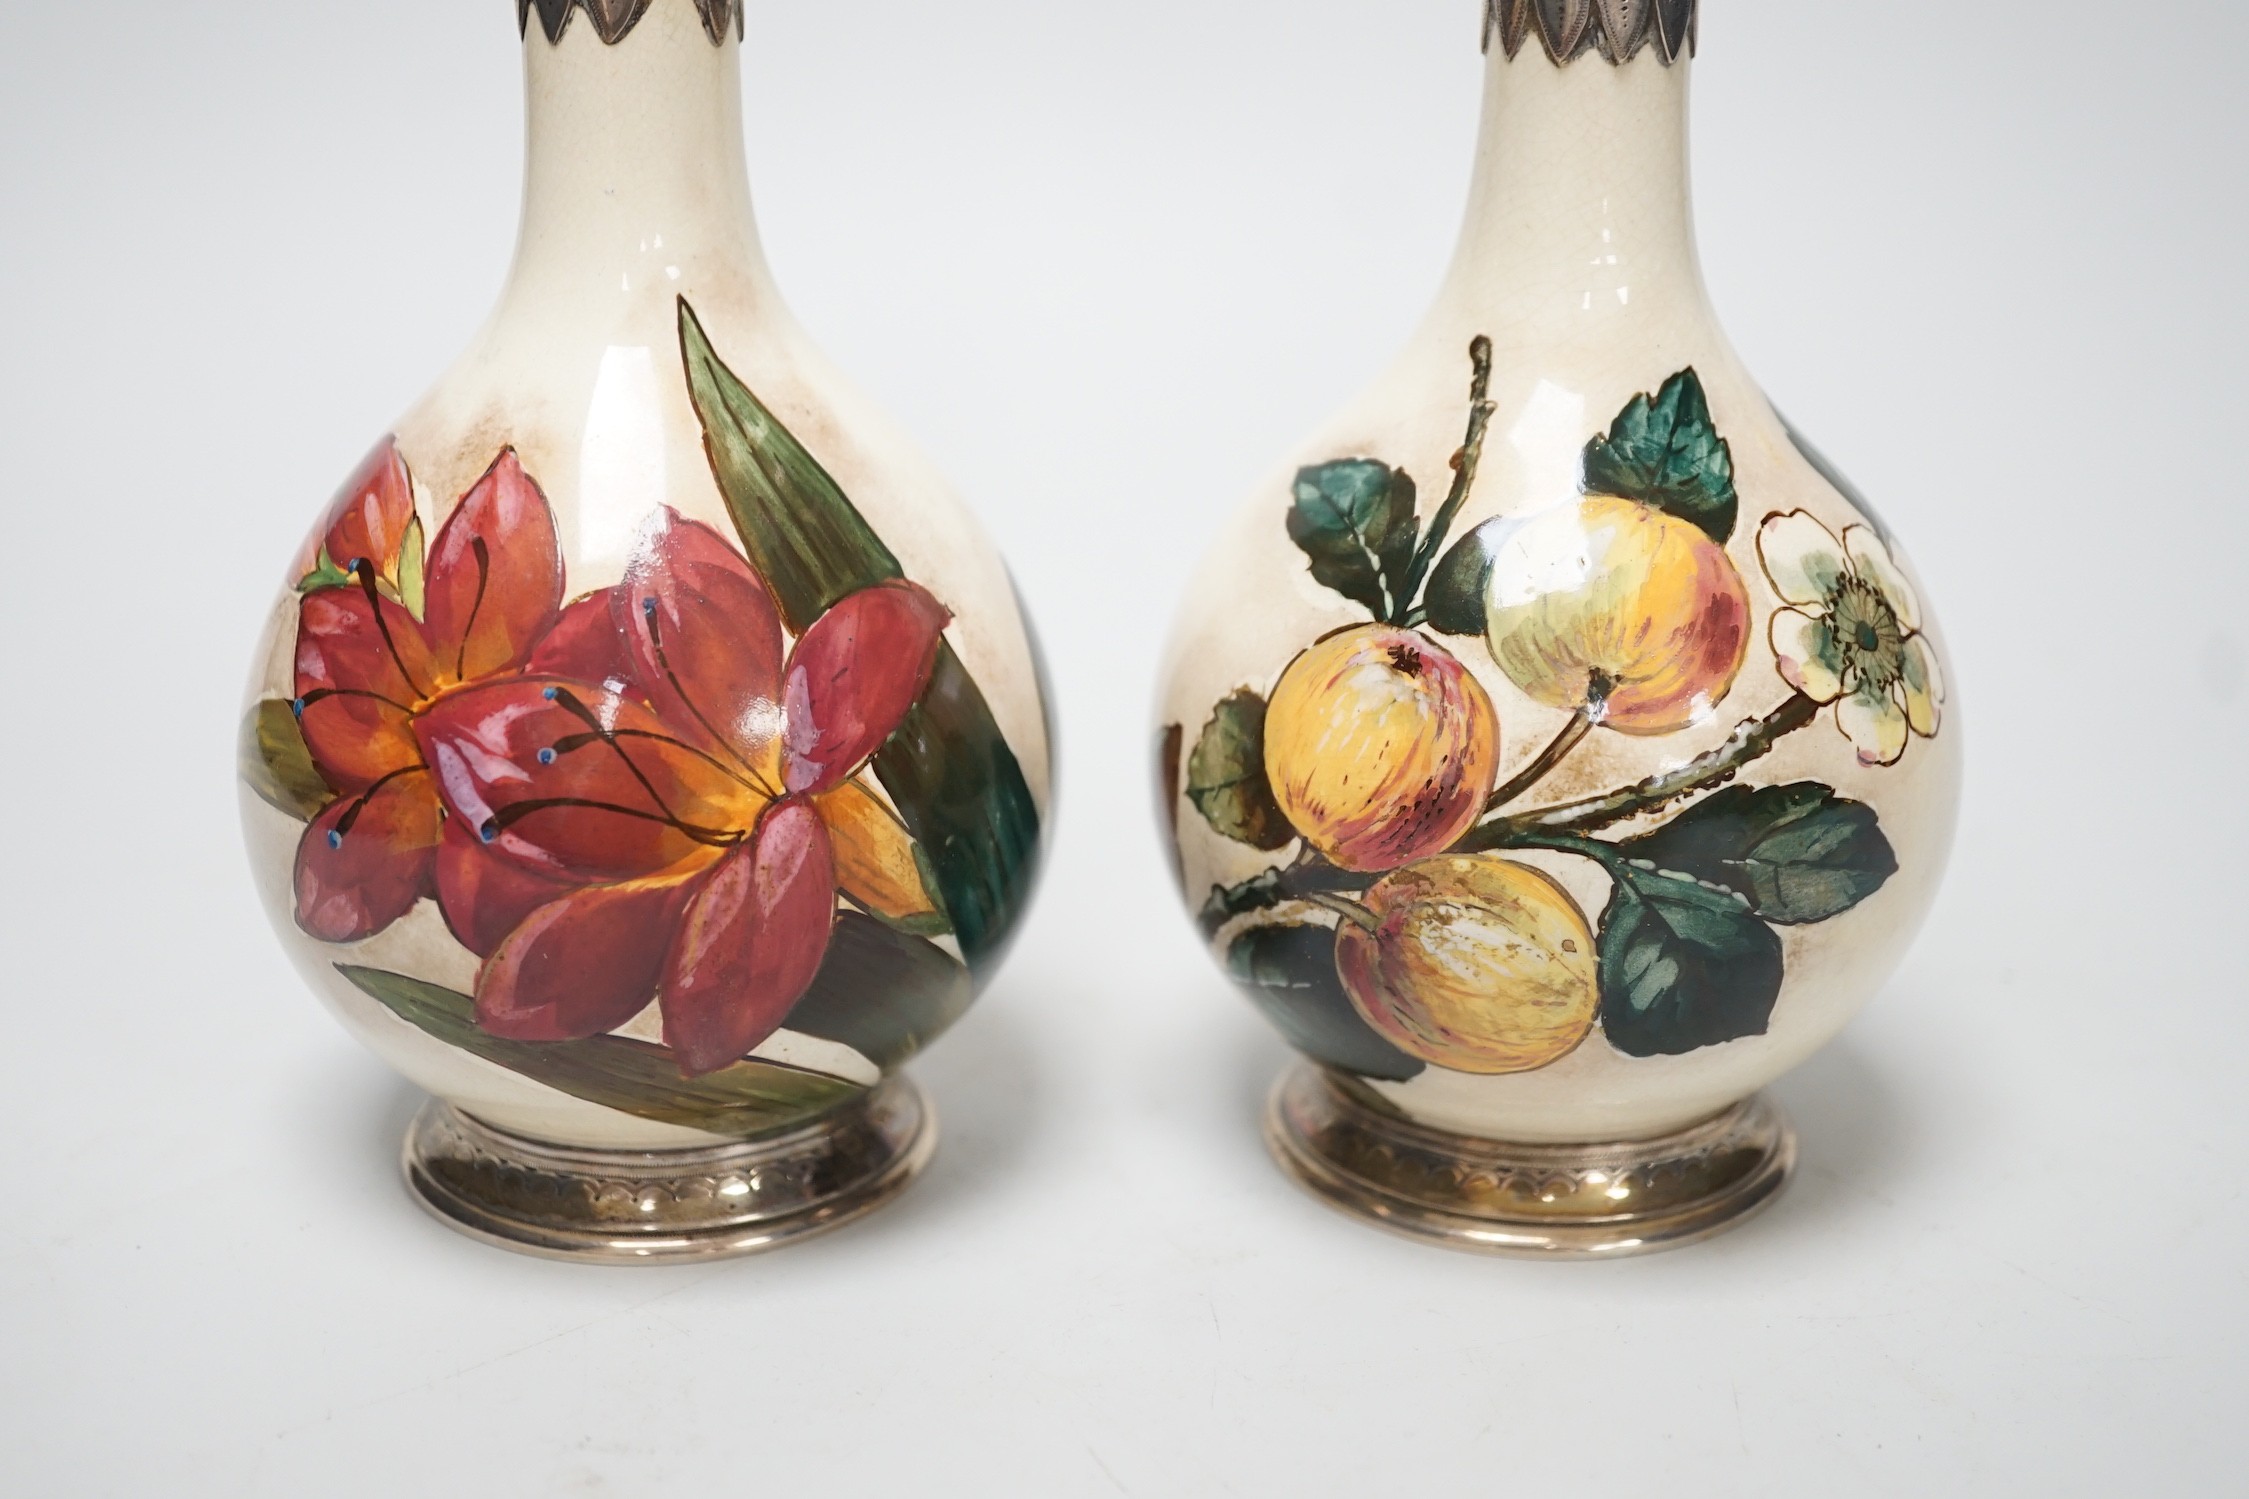 A pair of Victorian silver mounted floral painted earthenware bottle vases. 21cm high